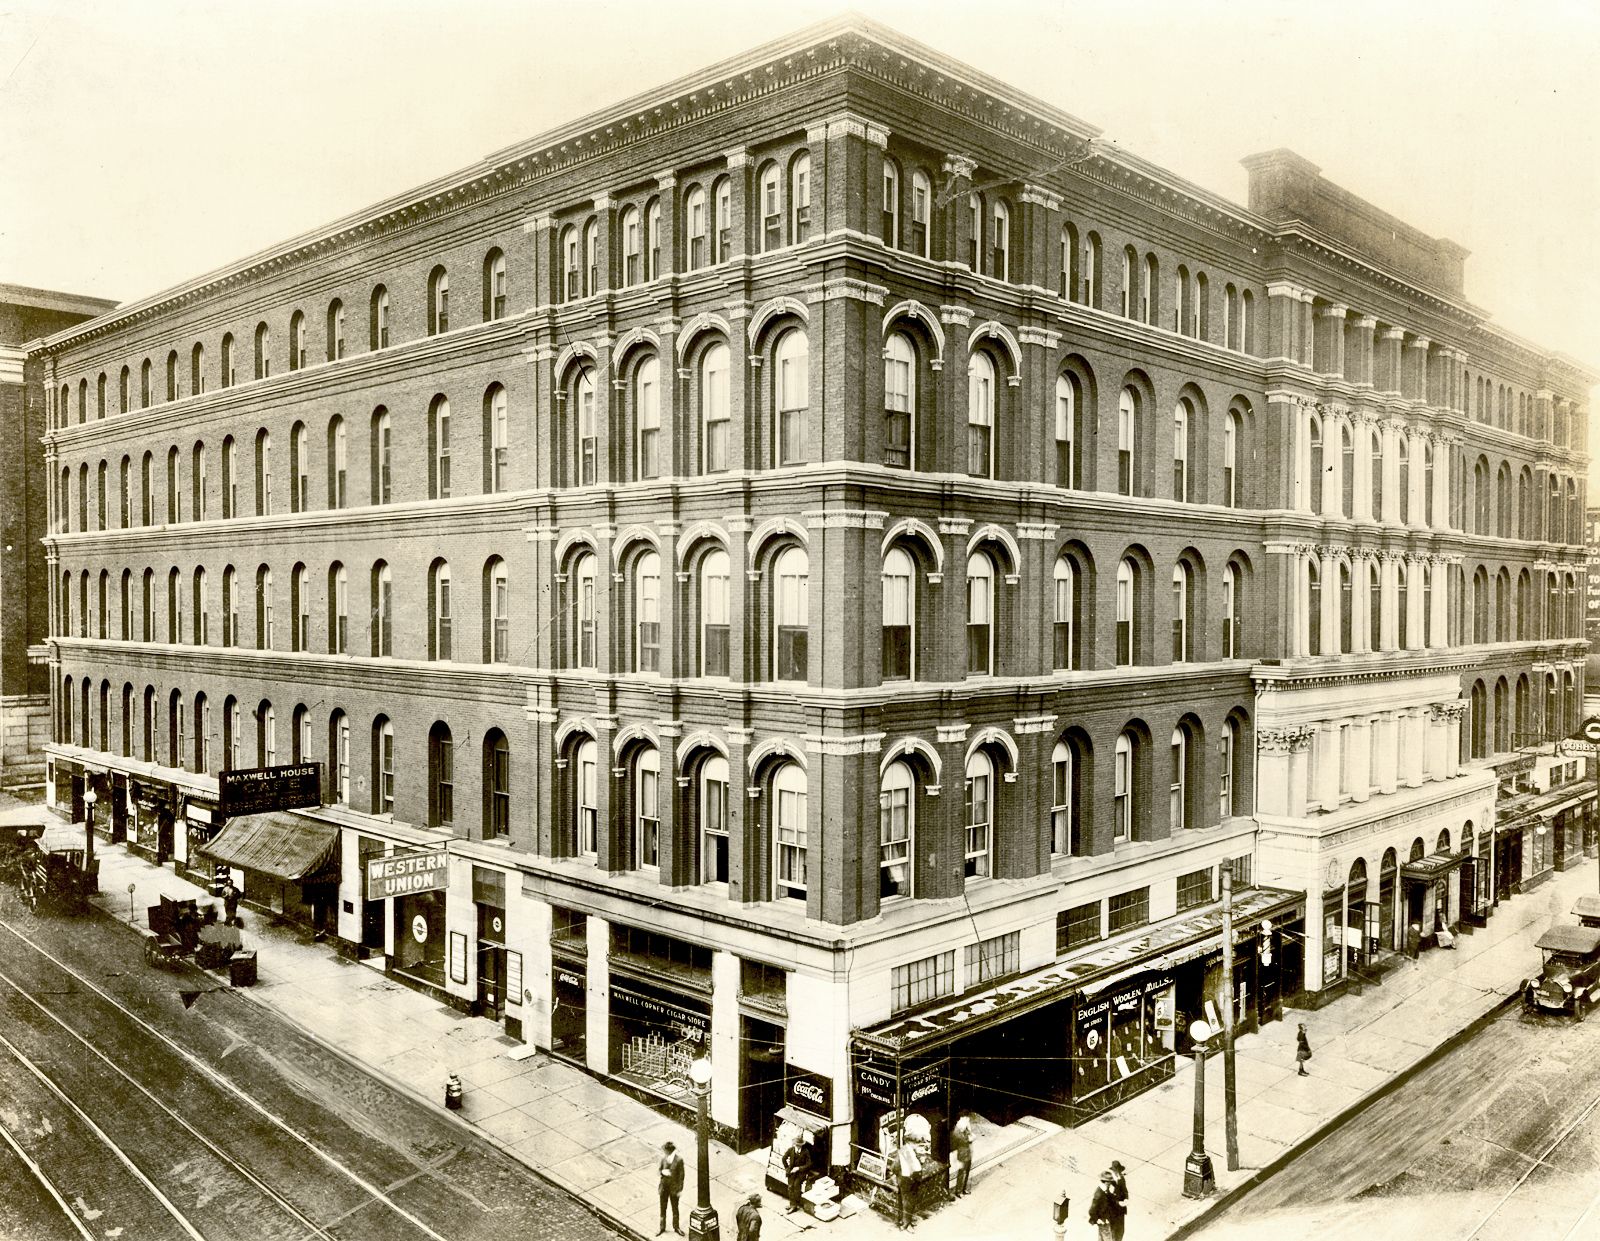 Heroes, Heroines, and History: The Maxwell House Hotel and Coffee